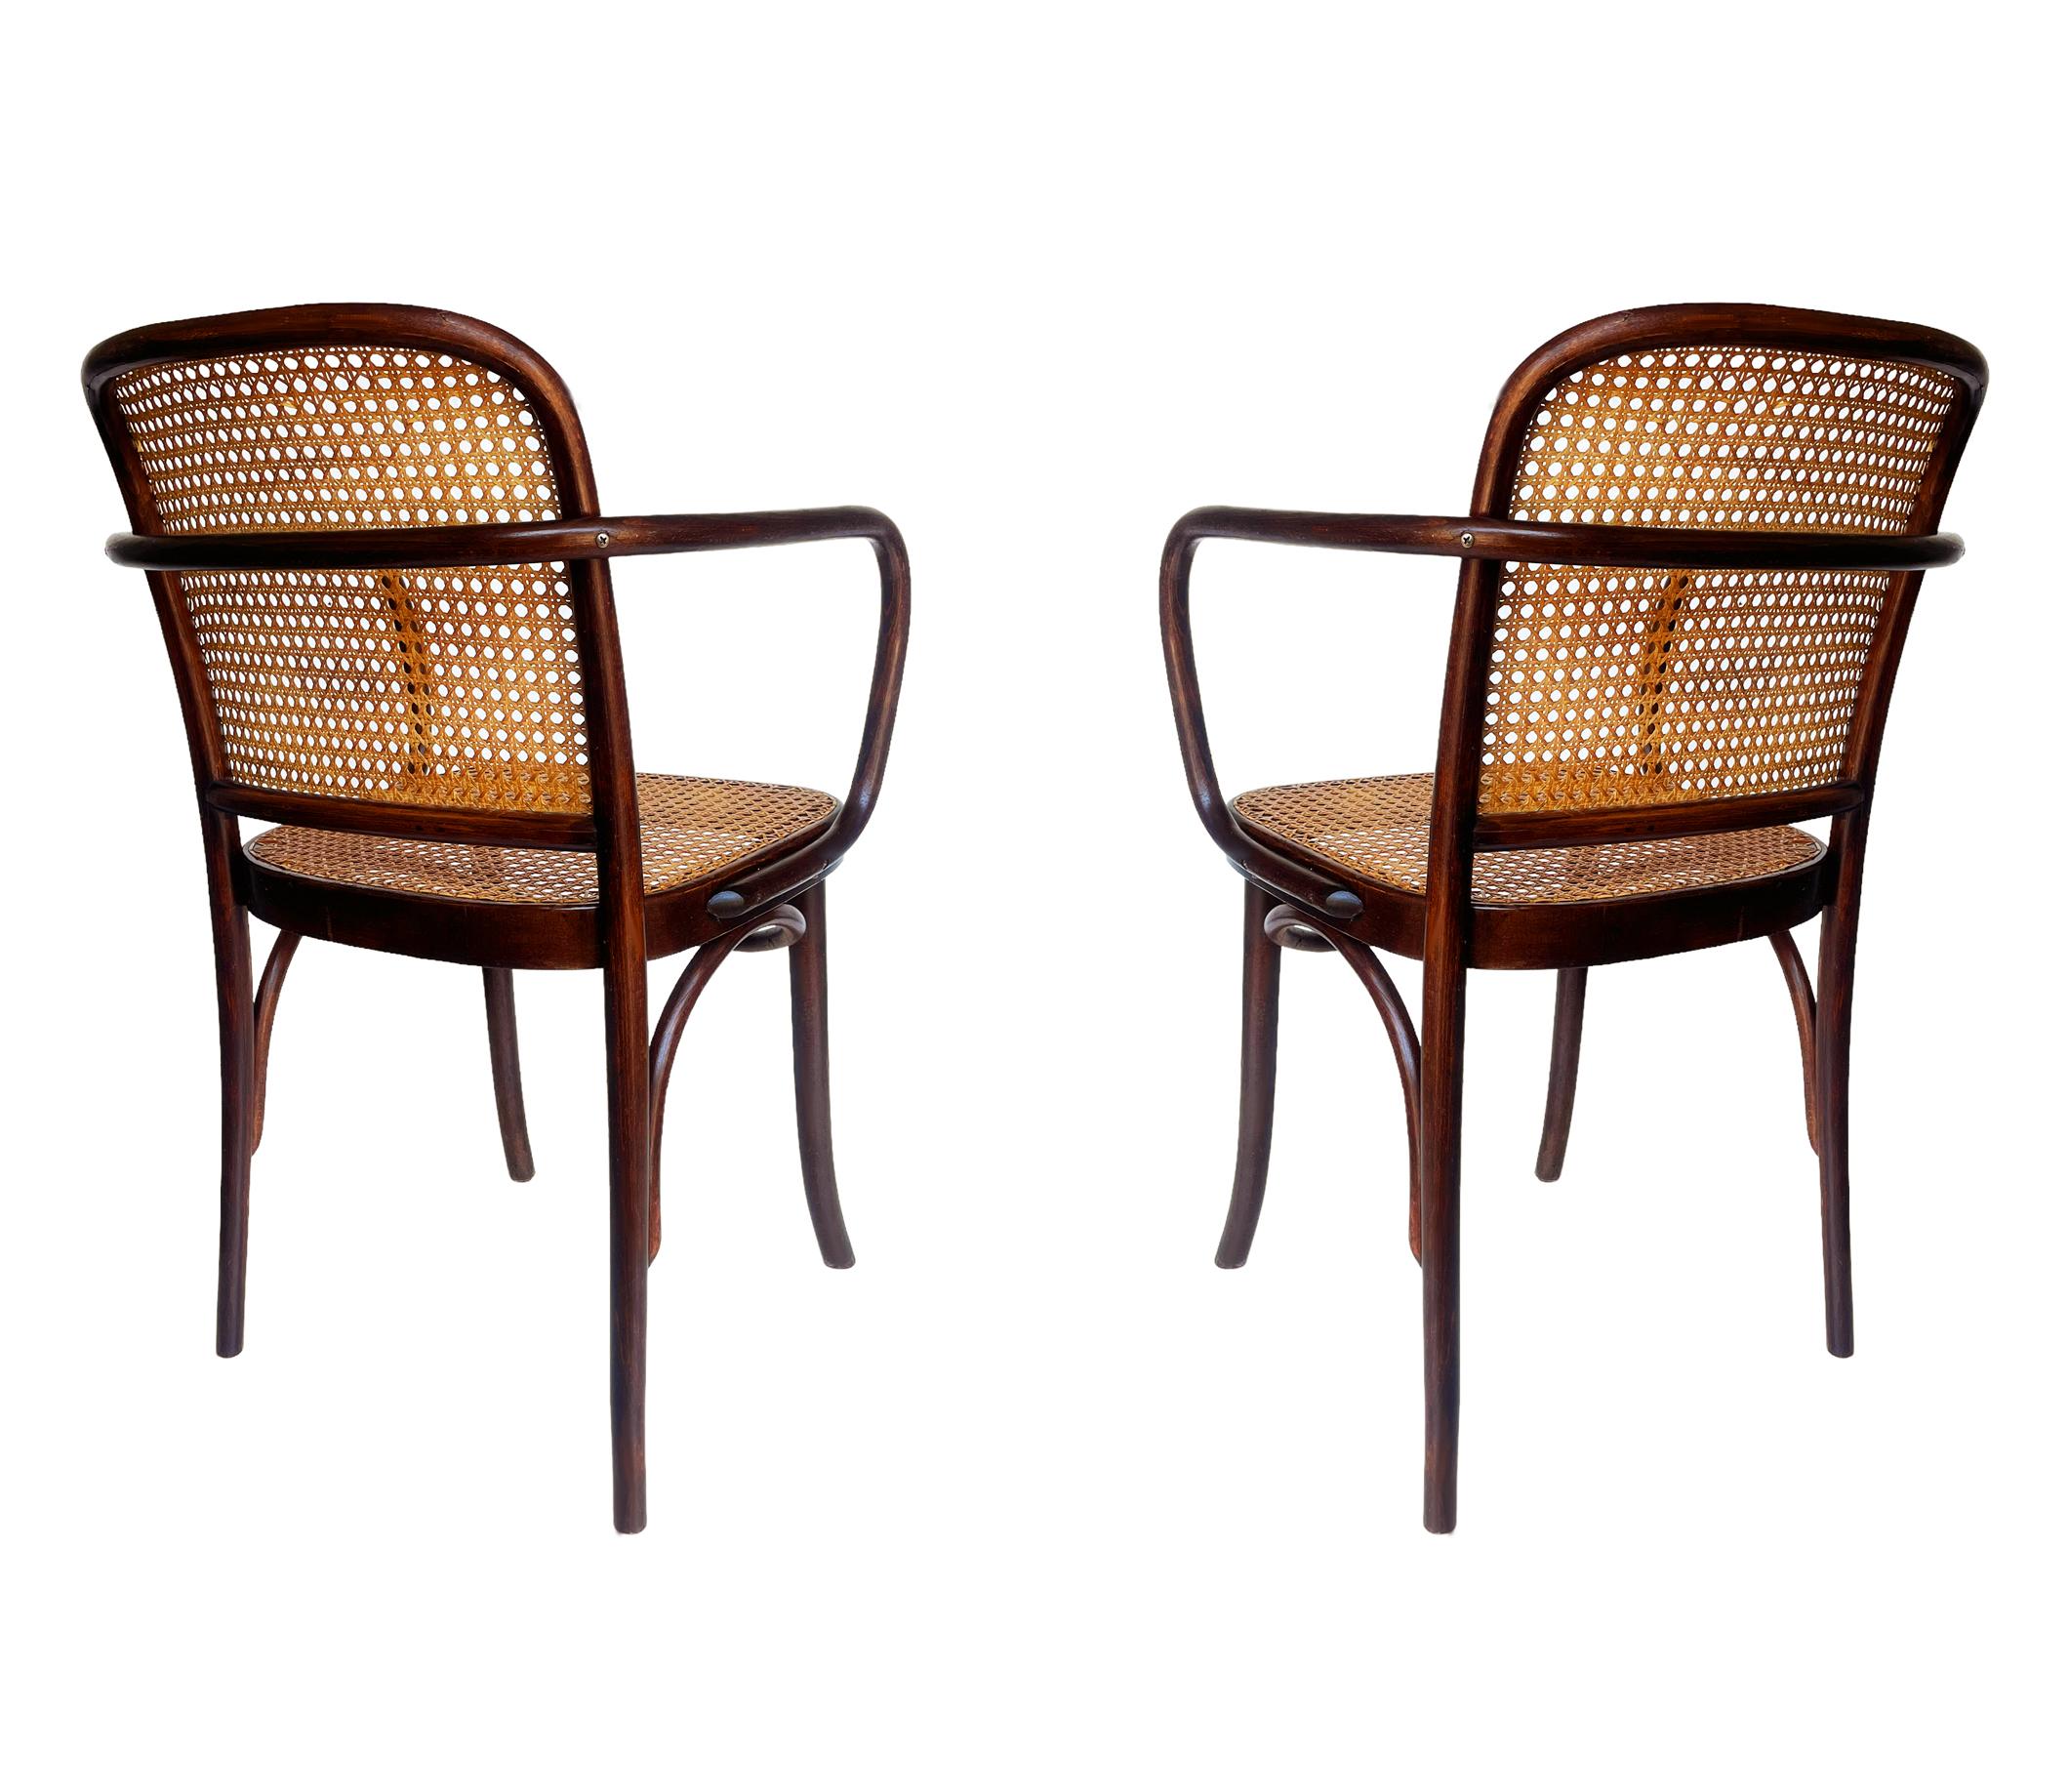 Set of 4 Mid-Century Modern Dining Prague Chairs by Josef Hoffmann Cane & Wood In Good Condition For Sale In Philadelphia, PA